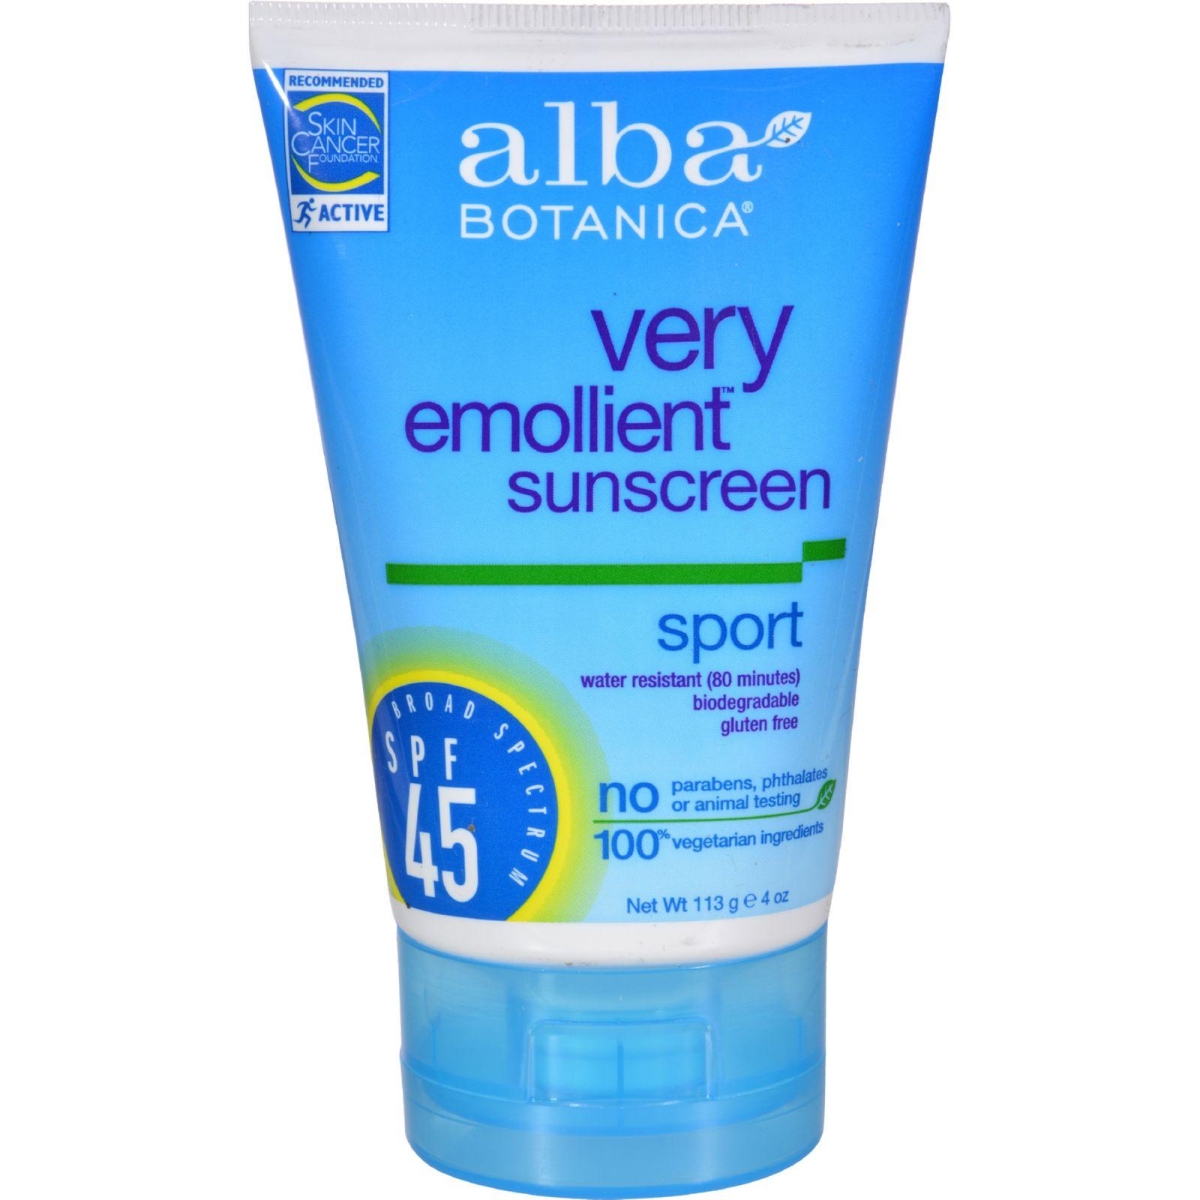 Hg0401265 4 Oz Very Emollient Sunscreen Natural Protection Sport Spf 45